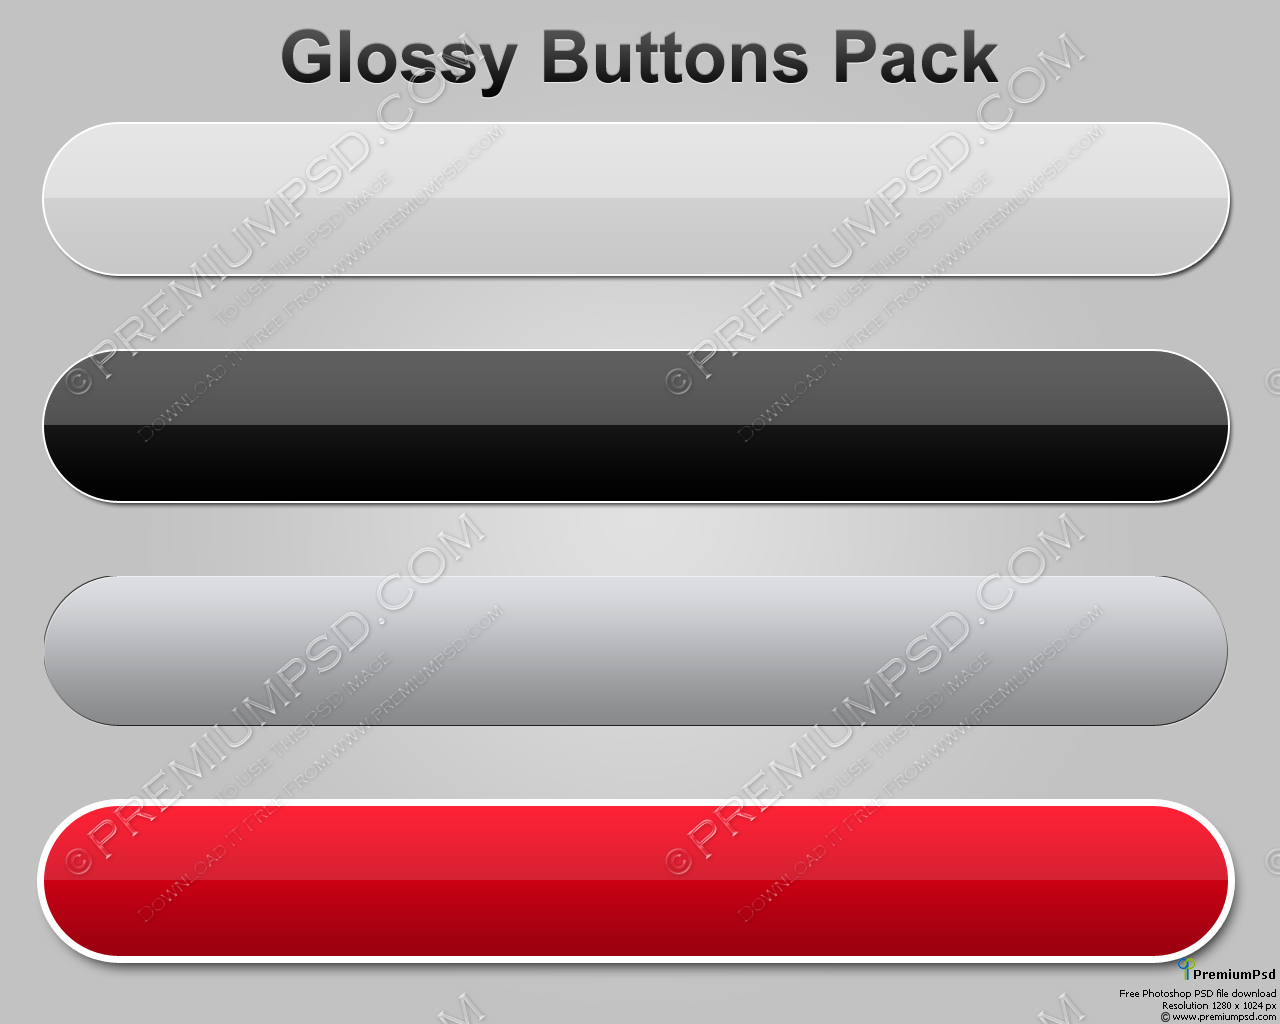 Free Glossy Button PSD